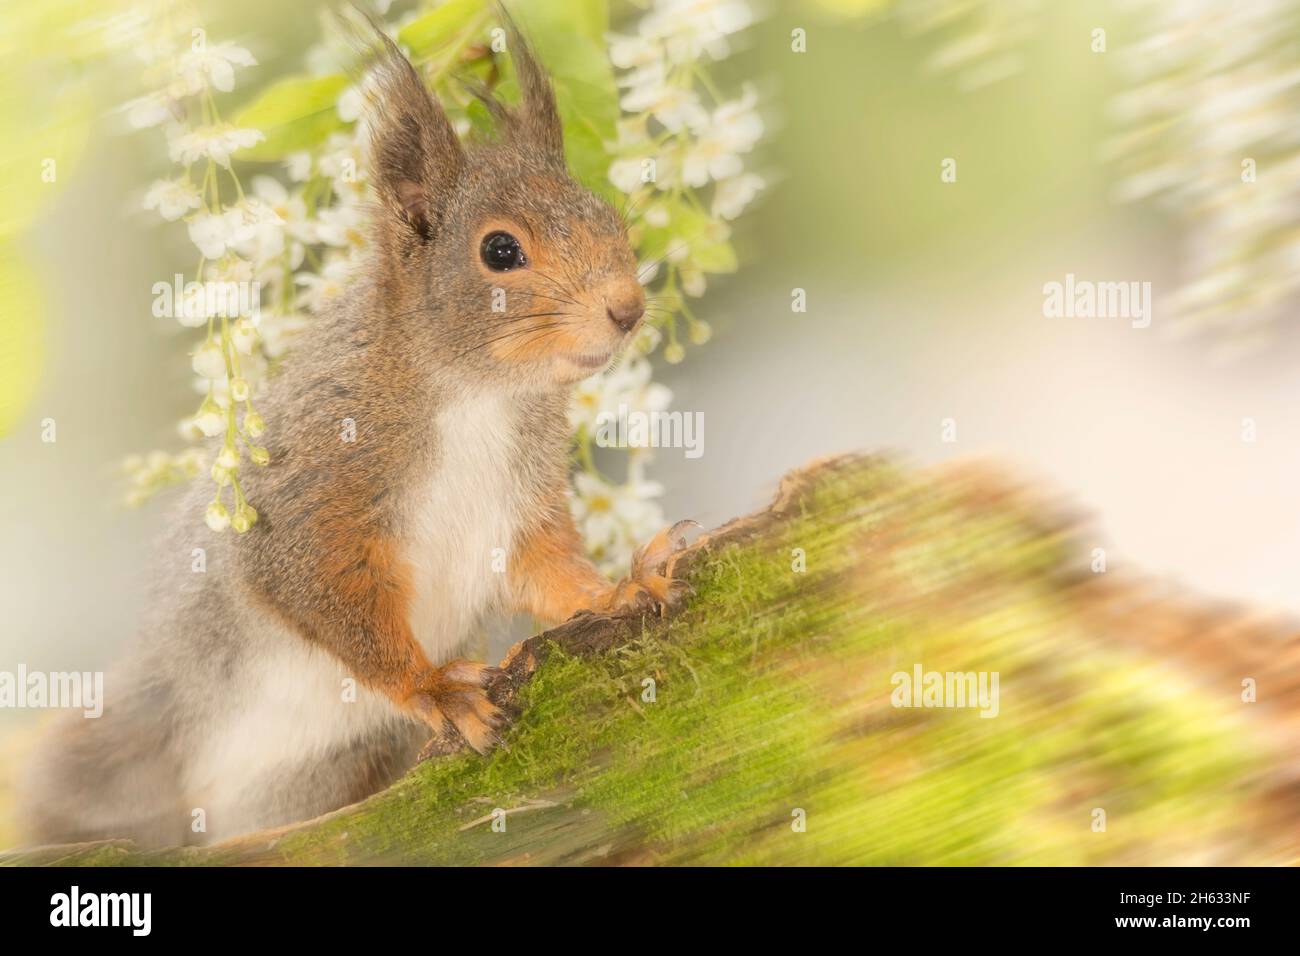 close up of red squirrel watching away standing behind a tree trunk with moss and flowers Stock Photo